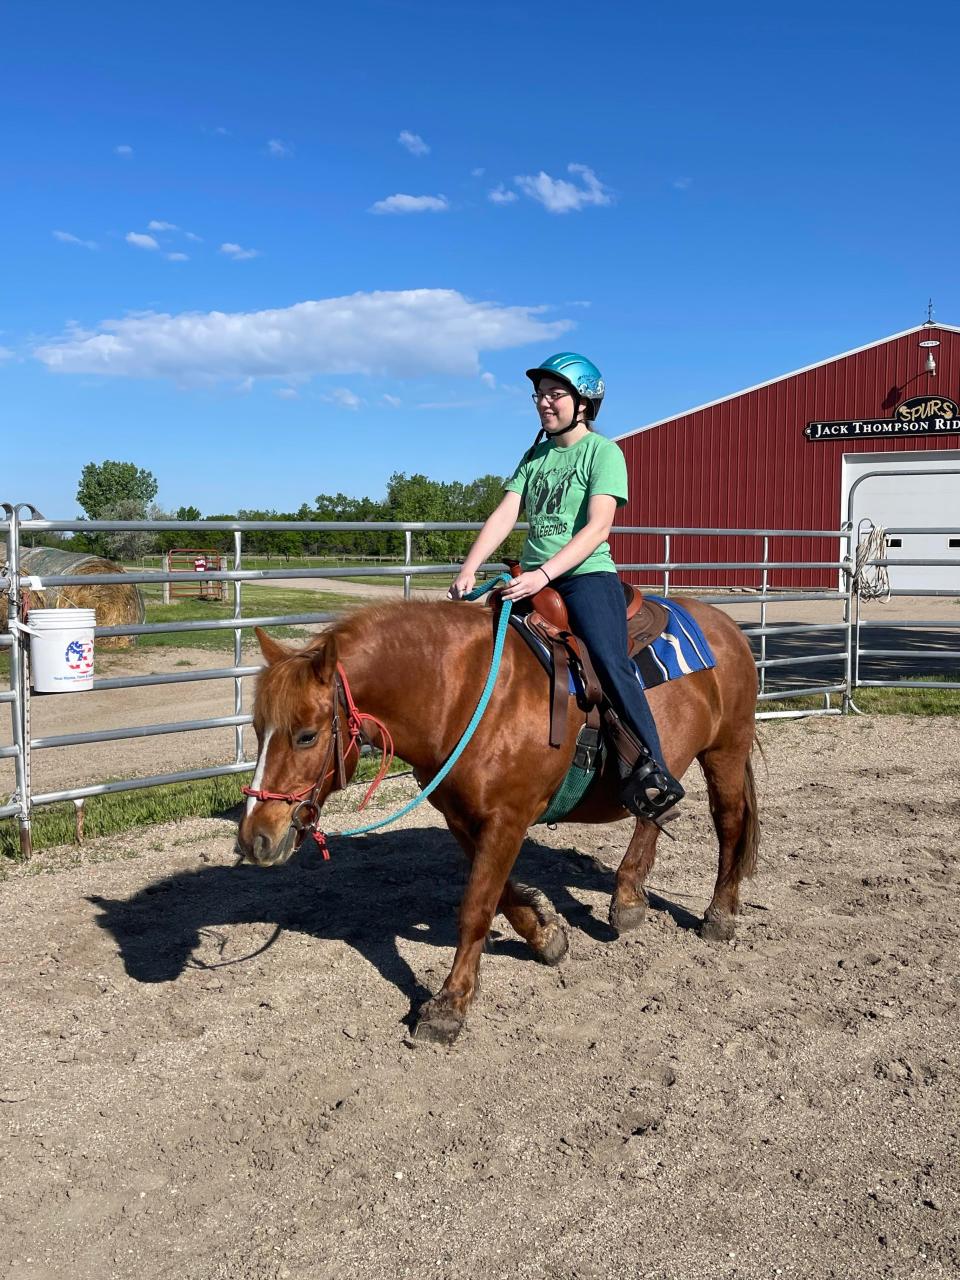 Eschenbaum gets one last training session in at SPURS Therapeutic Riding Center before taking off for Orlando for the 2022 Special Olympics USA Games.